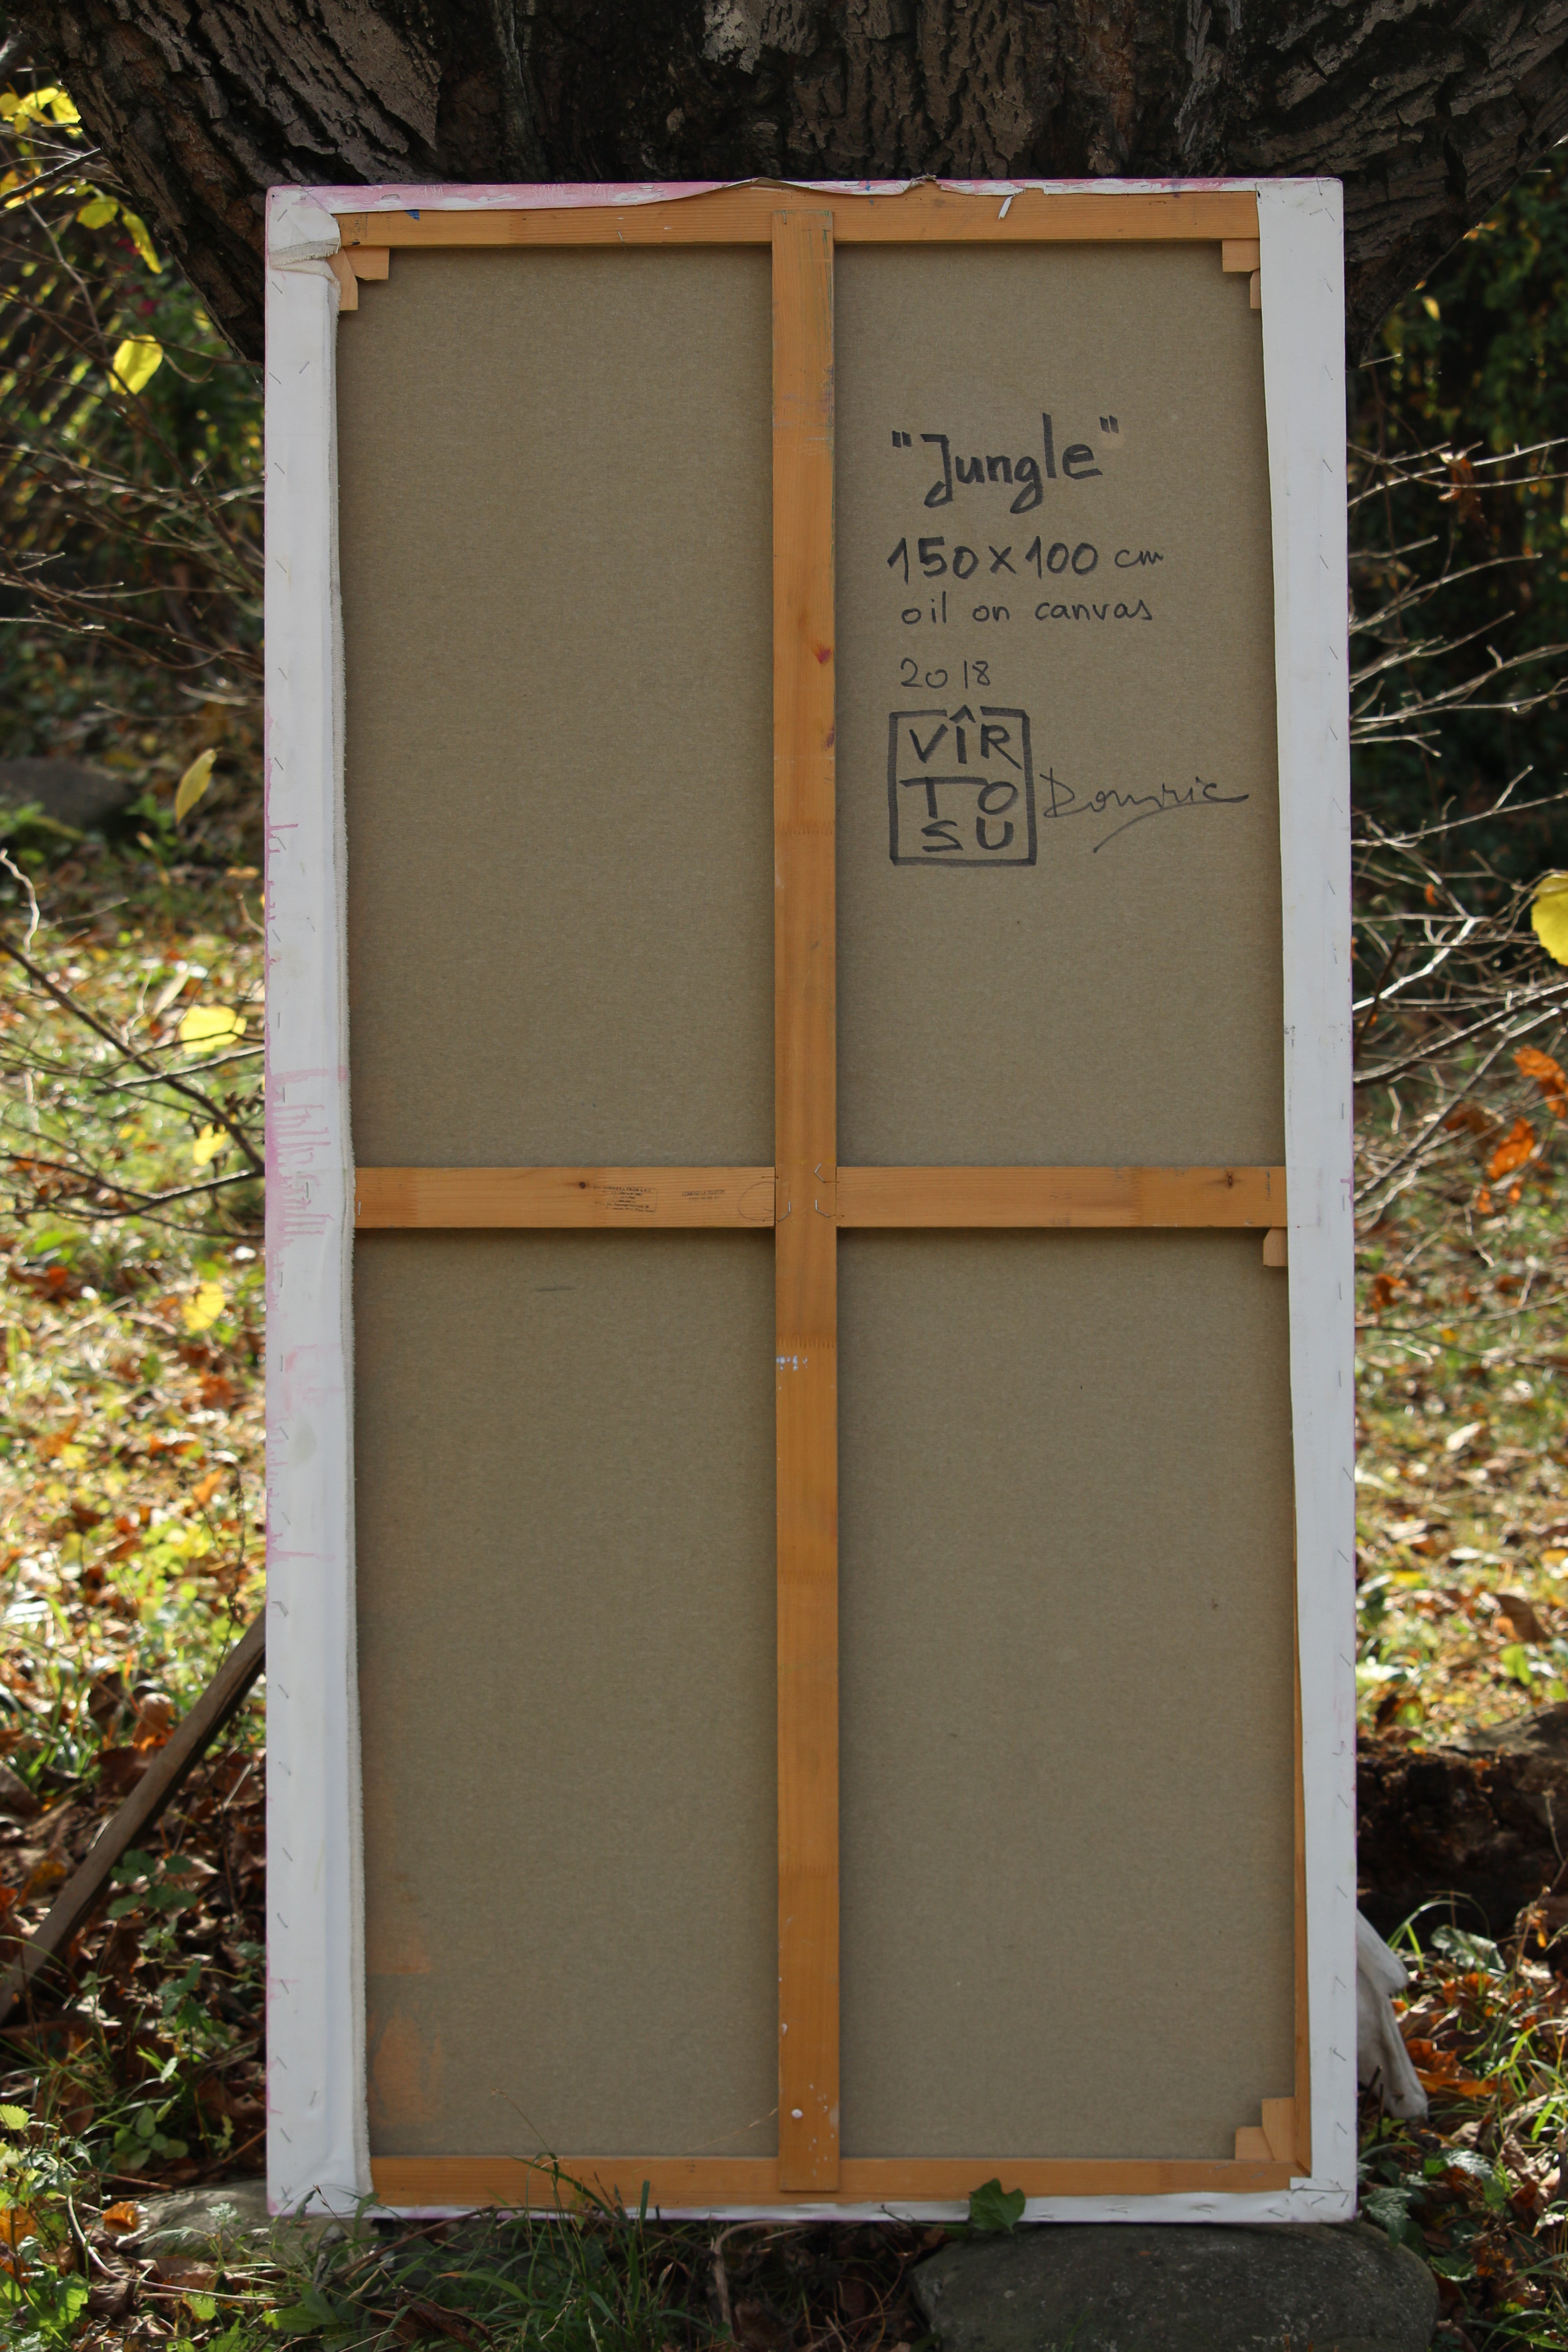 Back of the work "Jungle" showing signature of the artist. - work completed and photographed by the Dominic Virtosu in 2019 at his country studio in Romania.